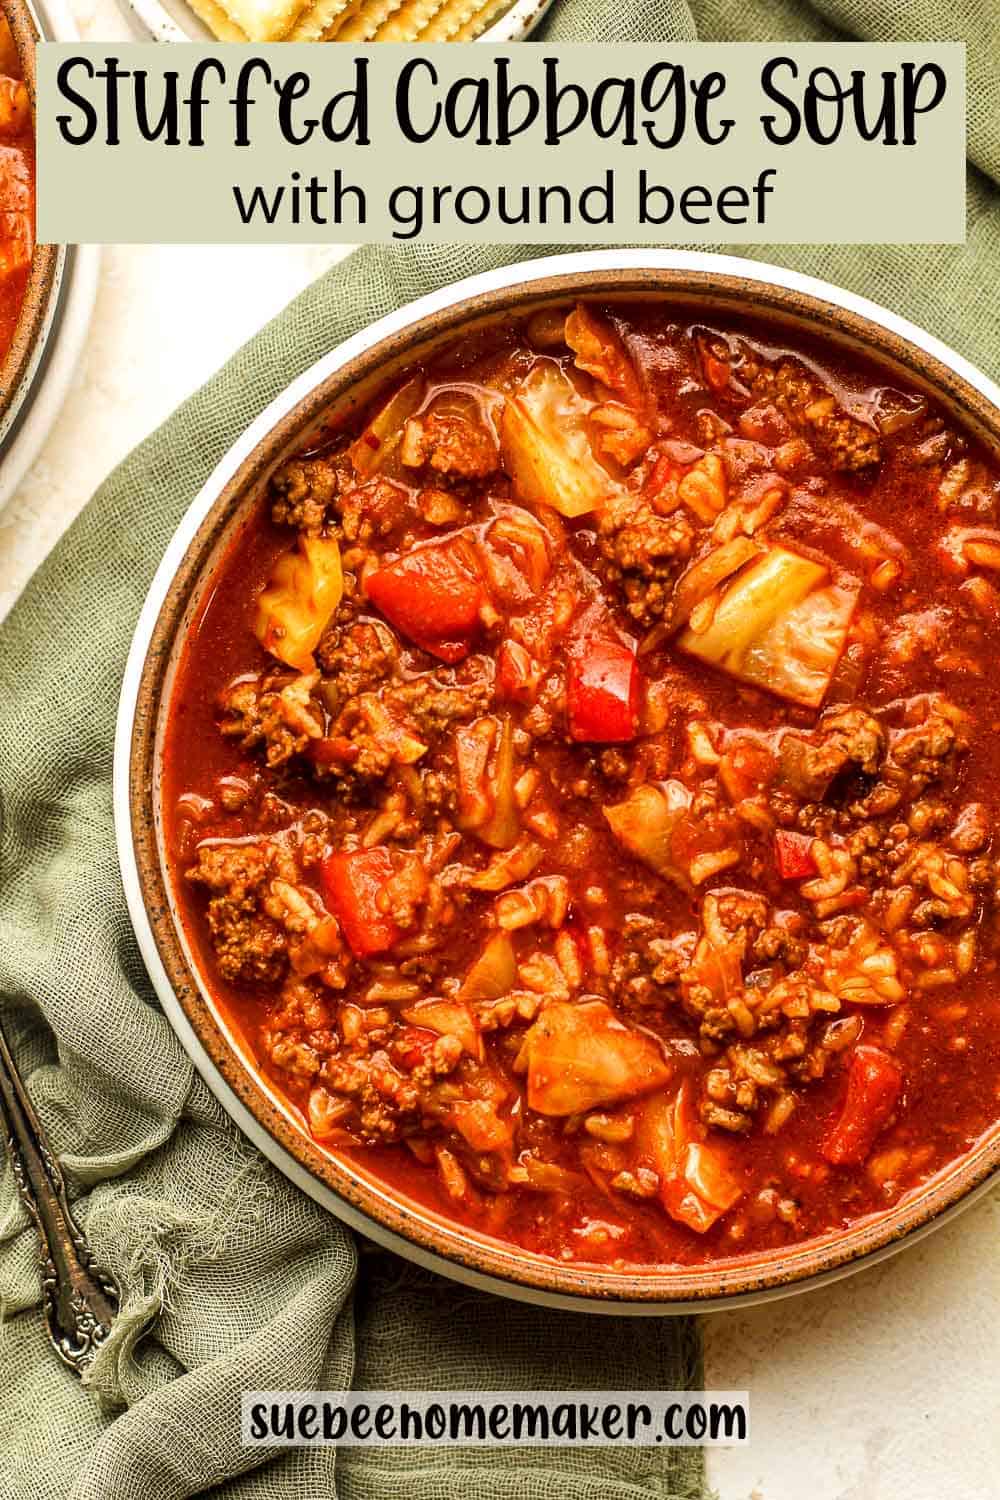 A bowl of stuffed cabbage soup with ground beef.